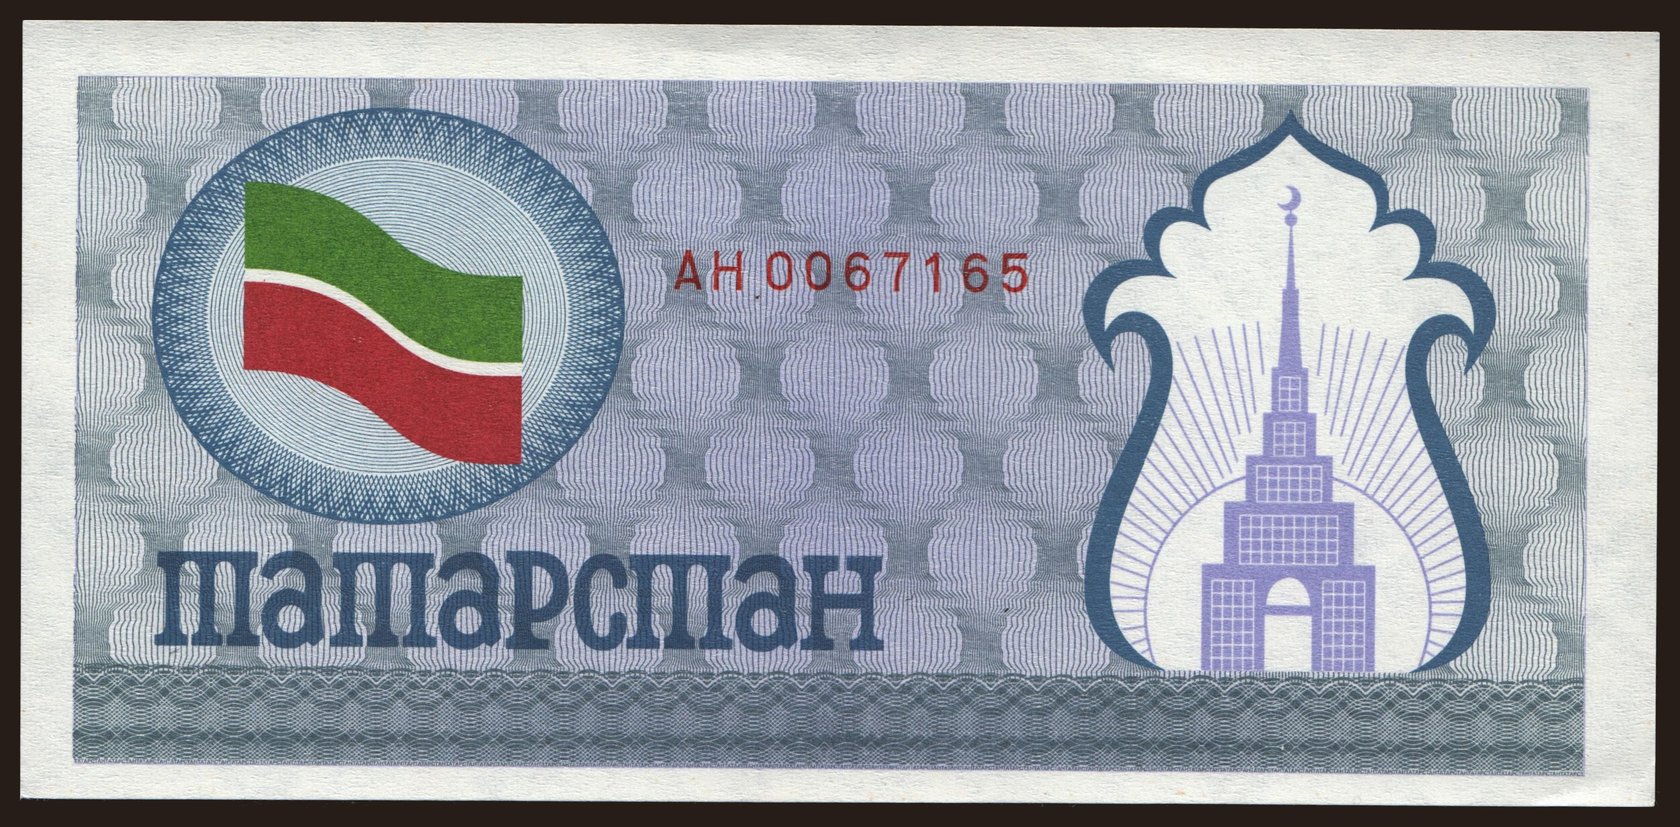 100 rubles, 1991